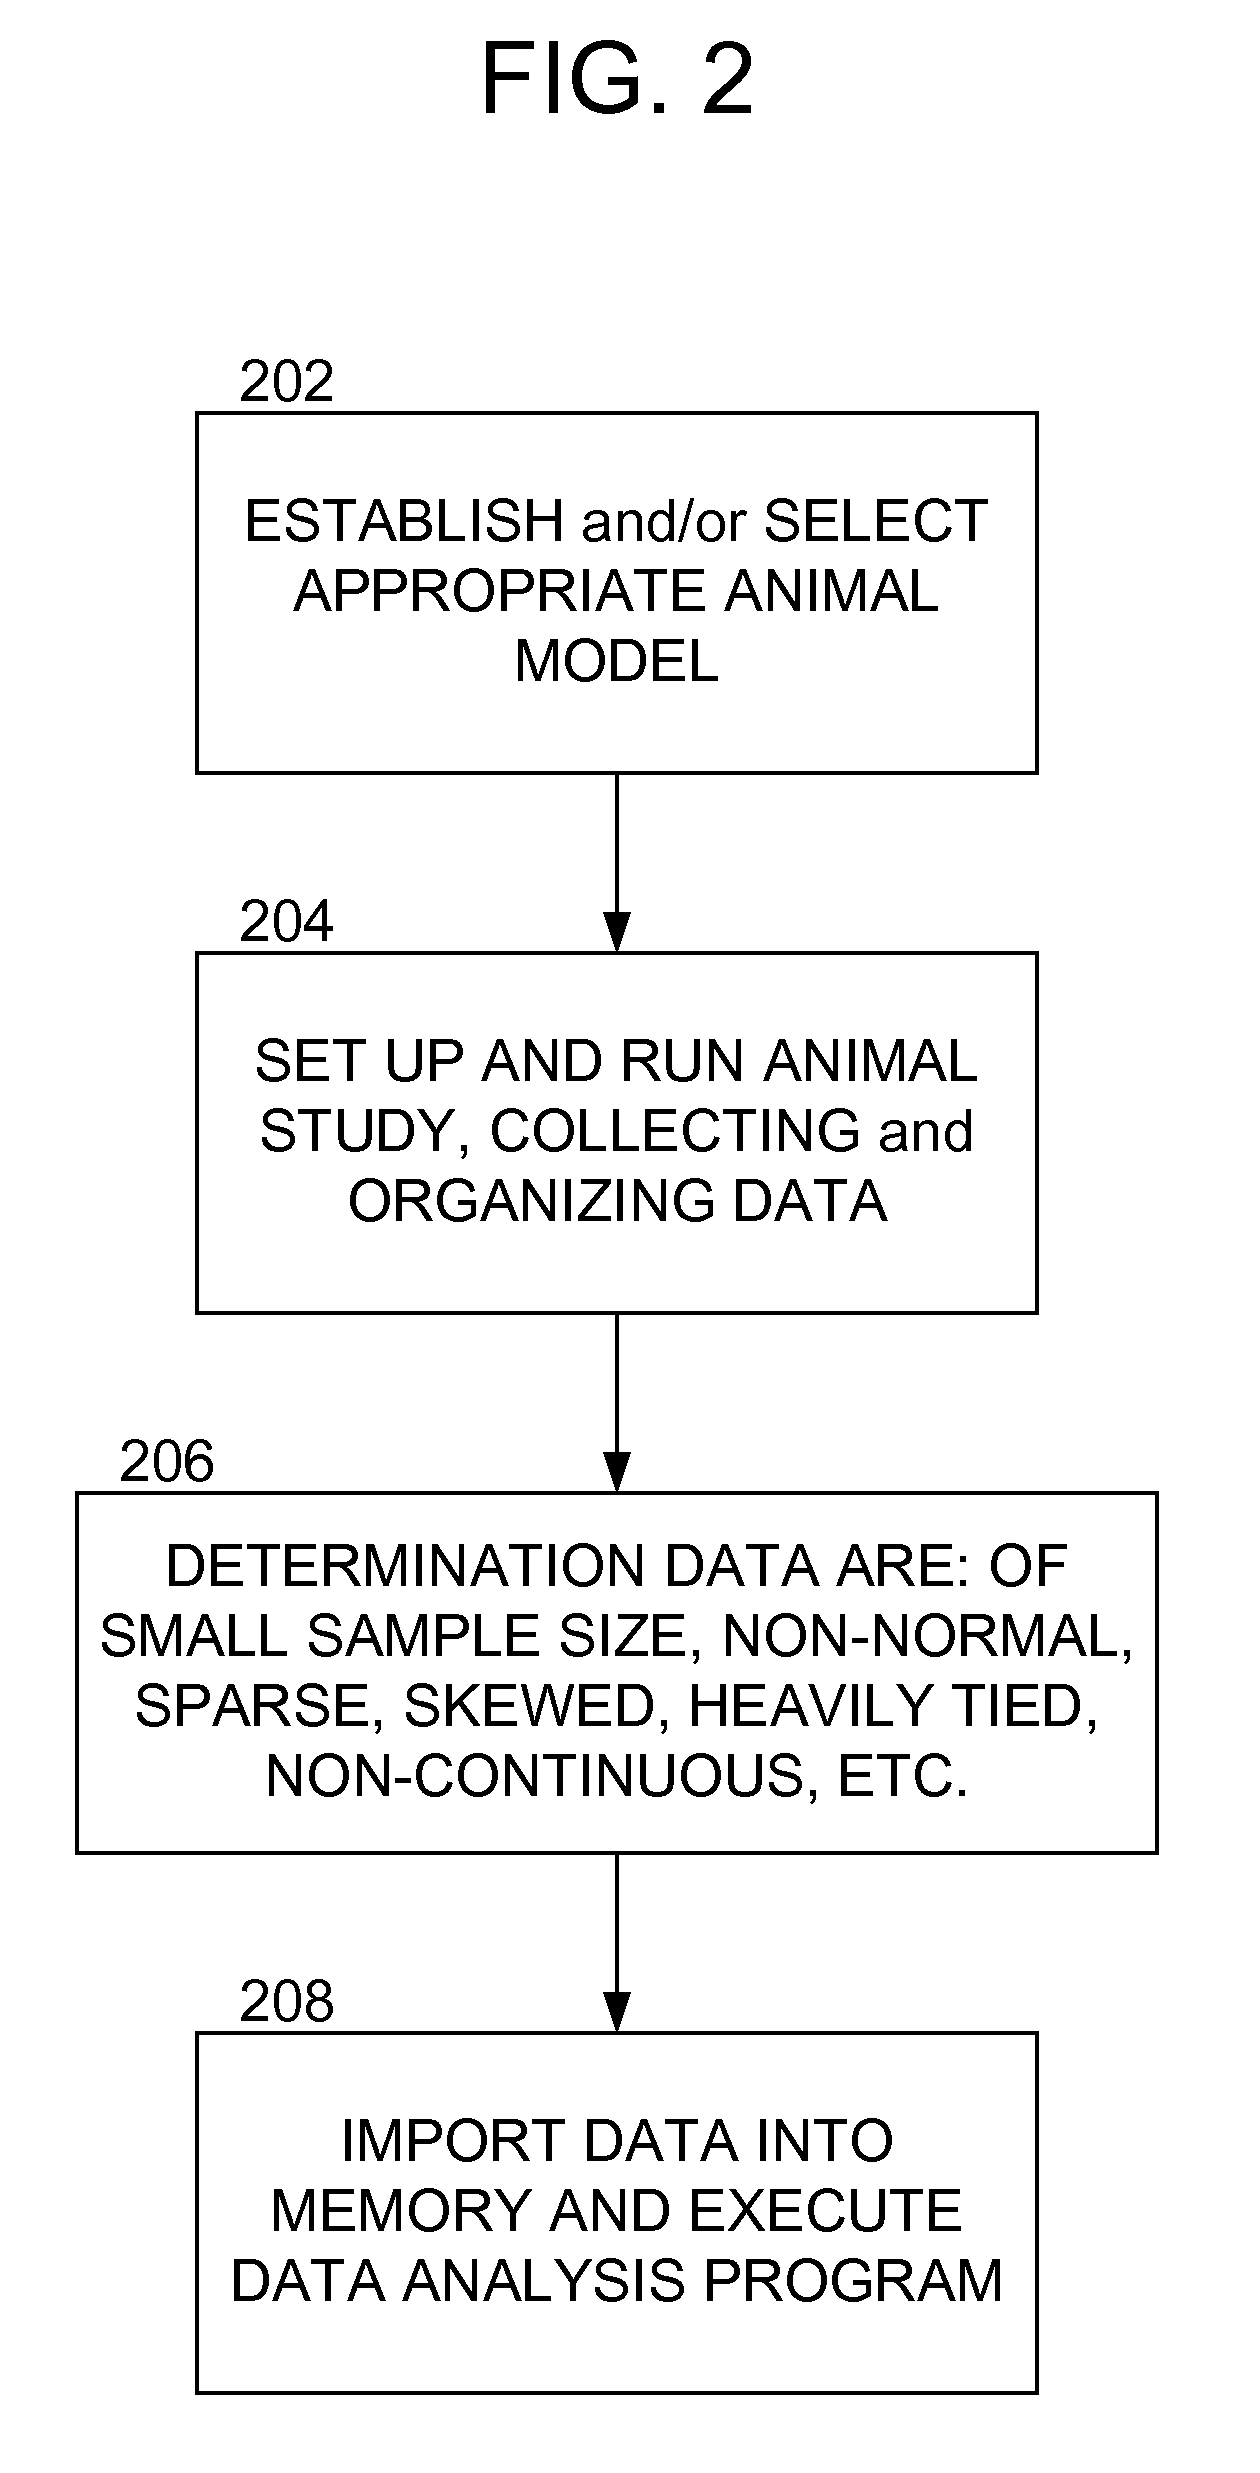 Methods and apparatus for analyzing test data in determining the effect of drug treatments